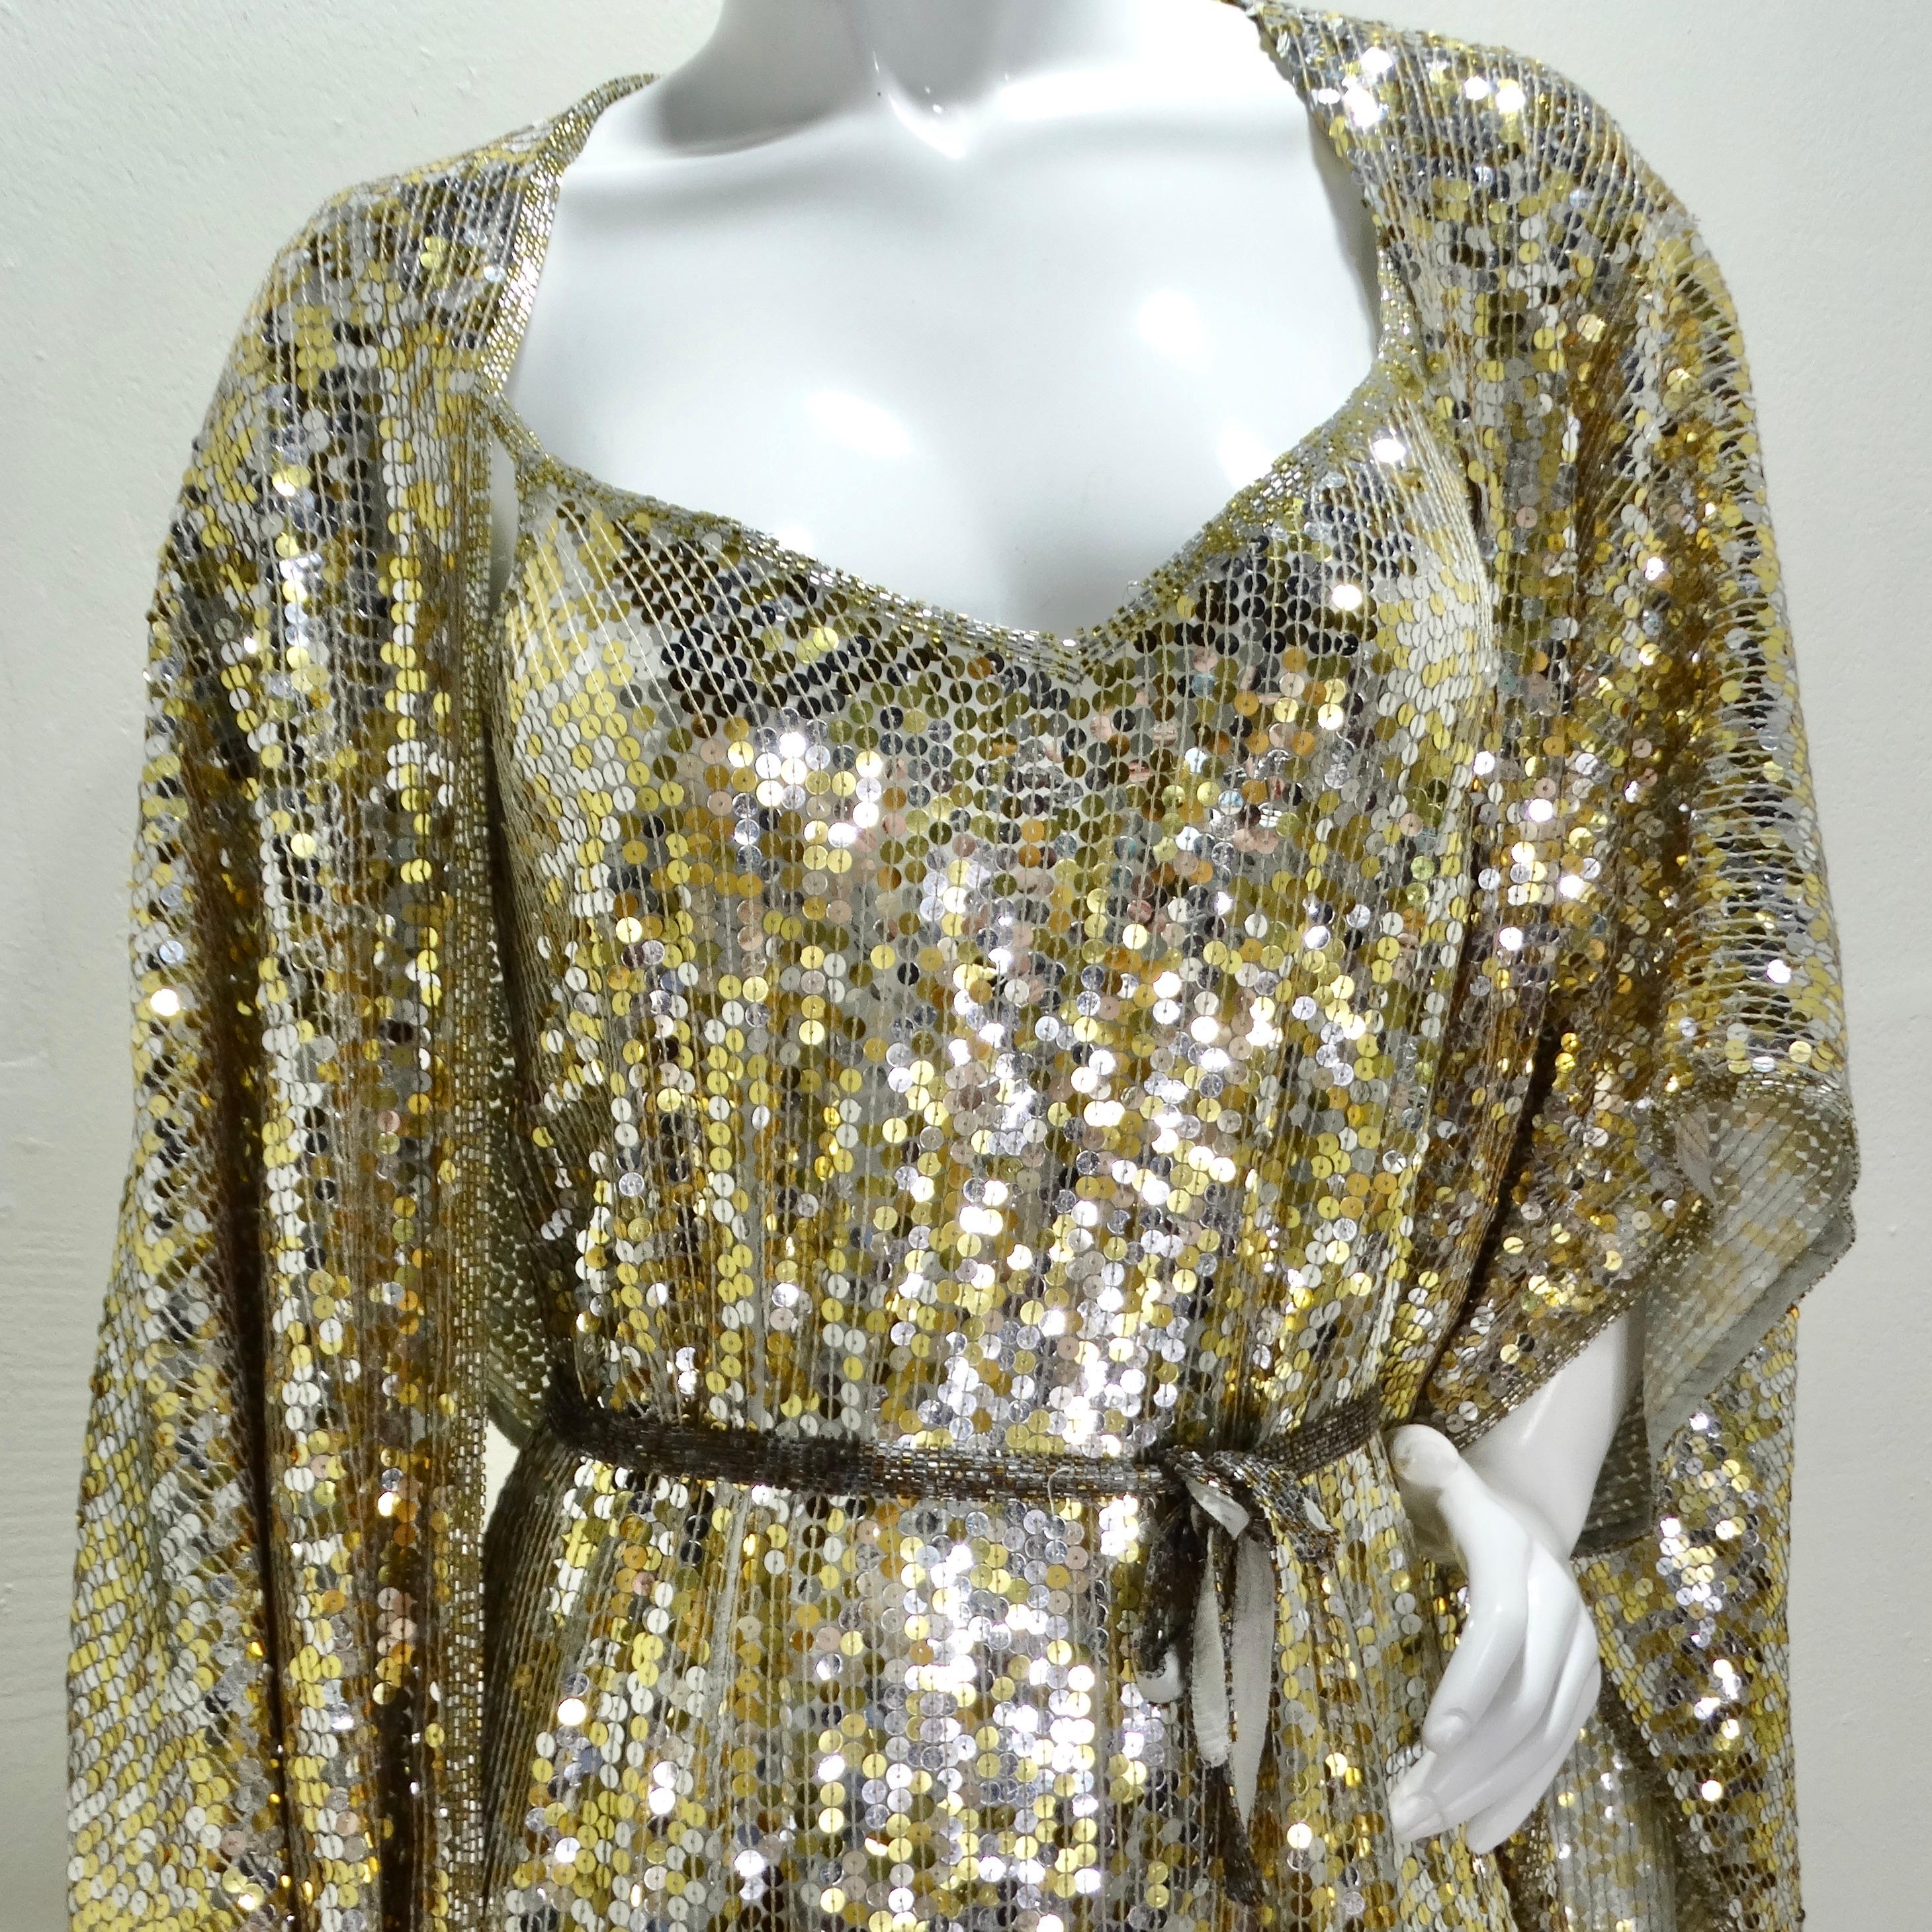 Dazzle in Glamour with the 1980s Capriccio Gold Sequin Embellished Dress, Shawl & Belt Set! Introducing a show-stopping 3-piece ensemble from the 1980s, the Capriccio Gold Sequin Embellished Dress, Shawl & Belt Set. The incredible drop-waist midi